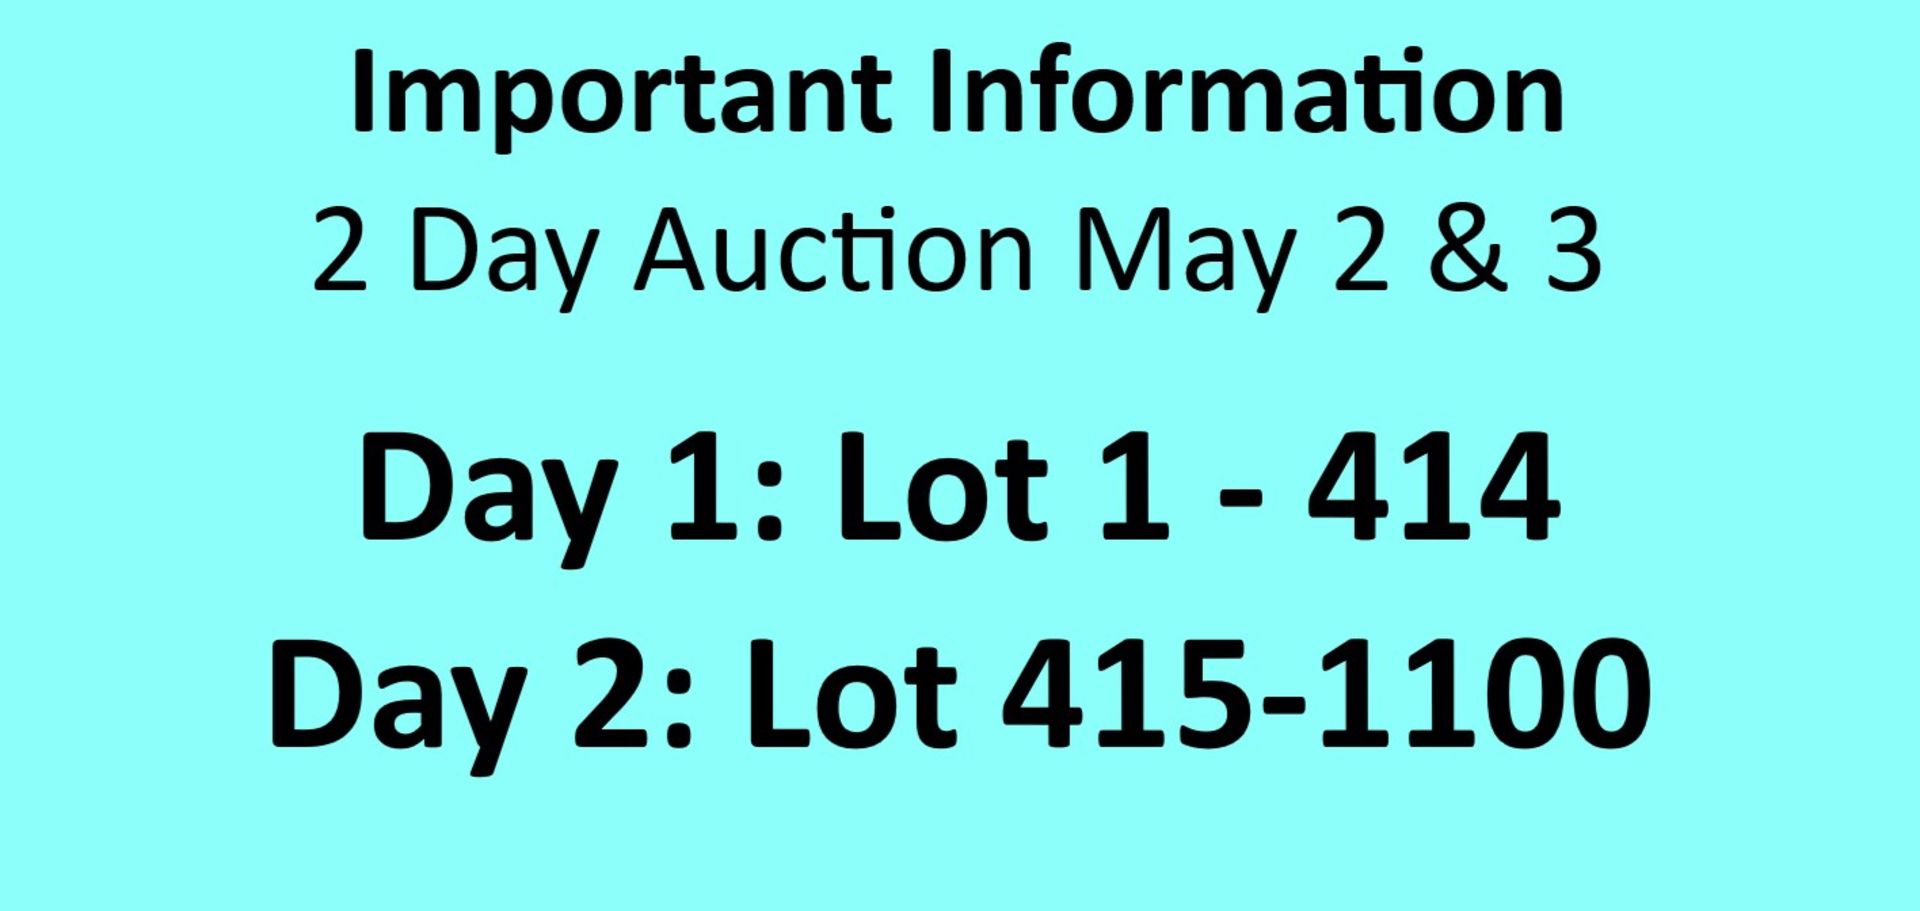 Important Information - 2 Day Auction - Former Assets of Inscape Corporation